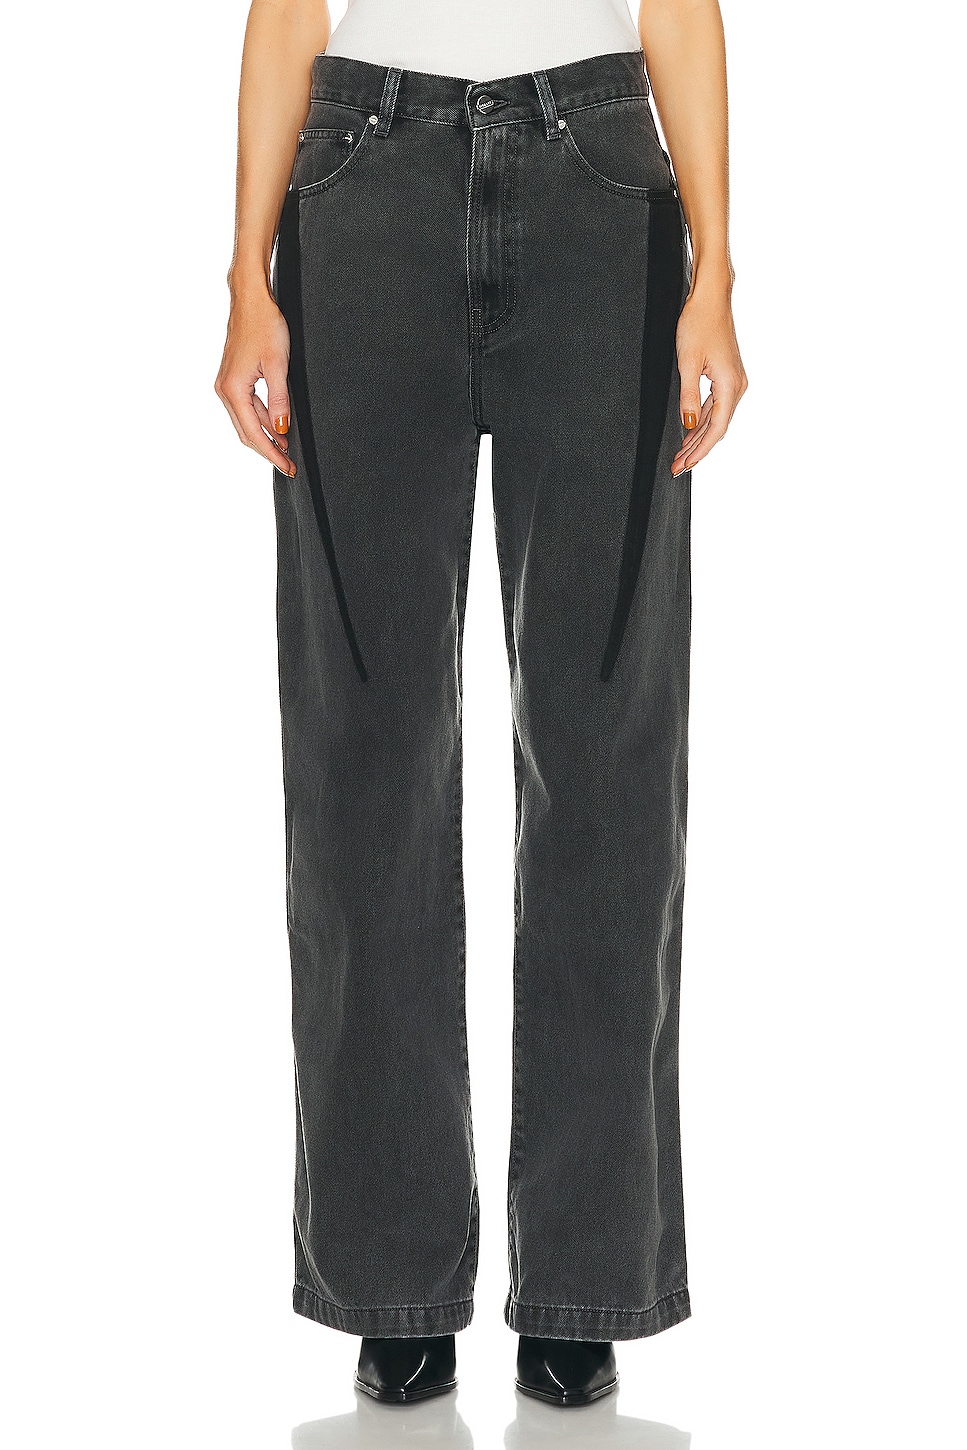 Image 1 of Dion Lee Slouchy Darted in Washed Black